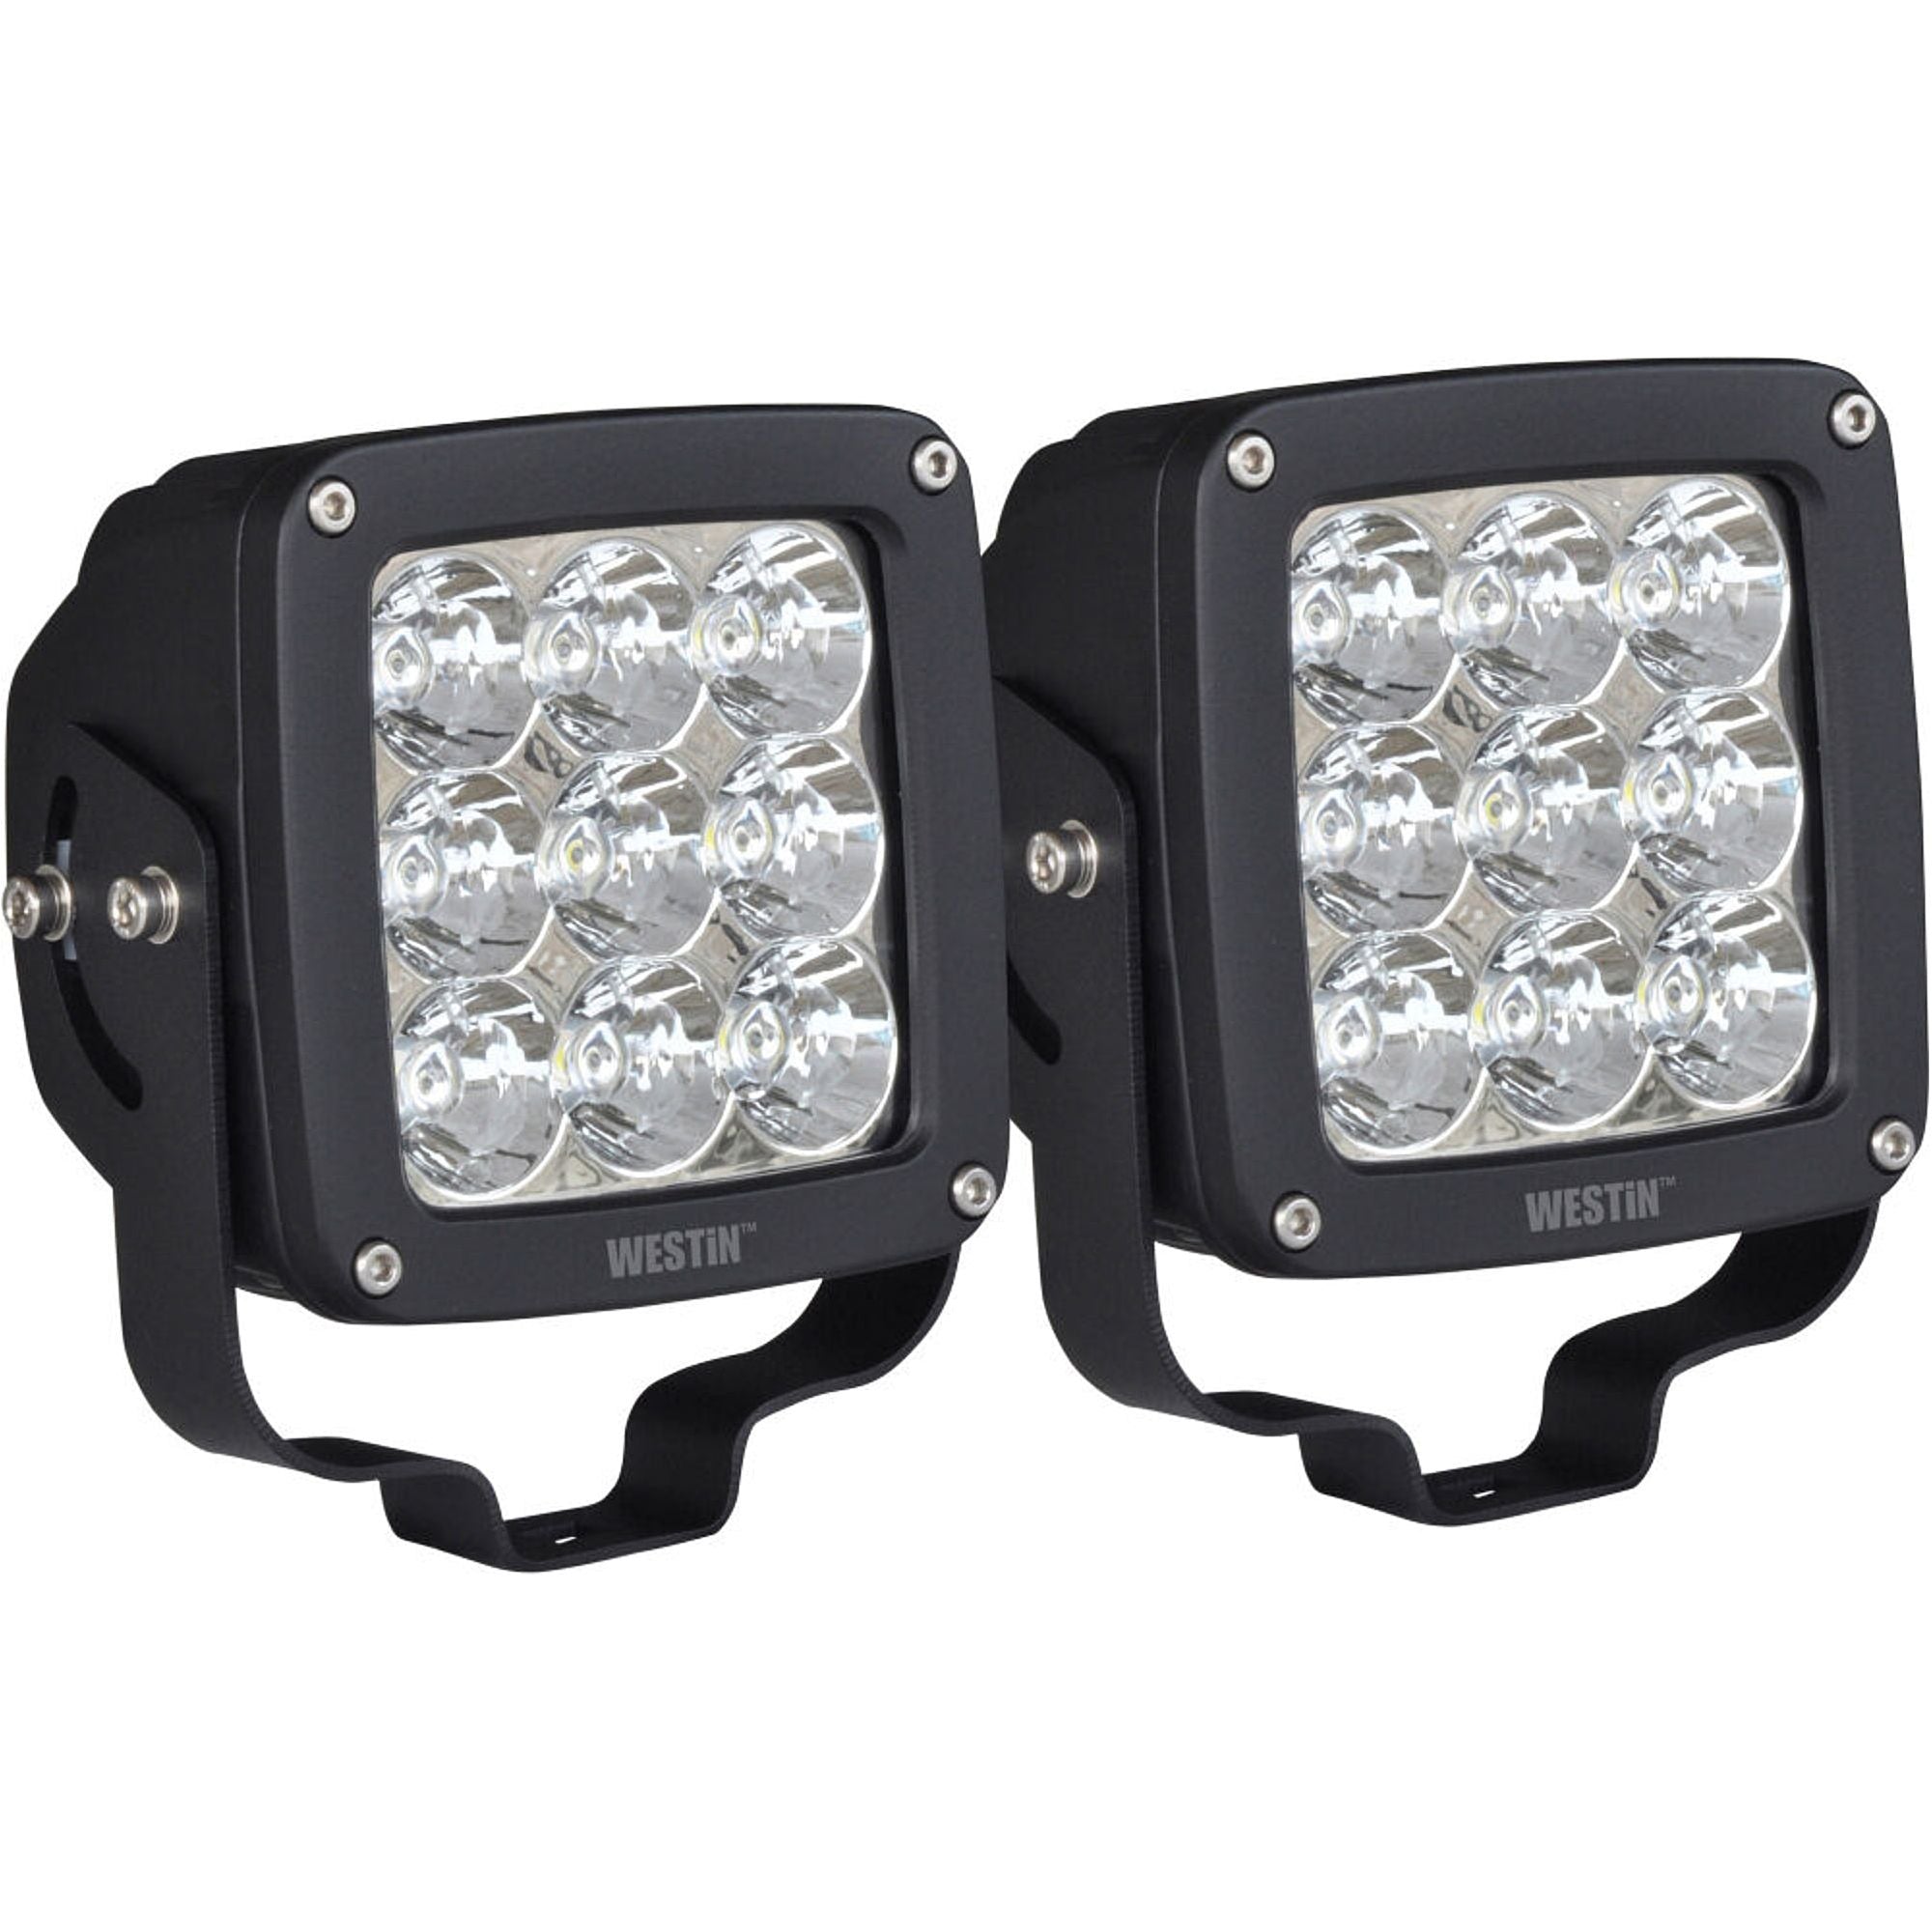 WESTIN 09-12219A-PR - Axis LED Auxiliary Light Square Spot Pattern Pair